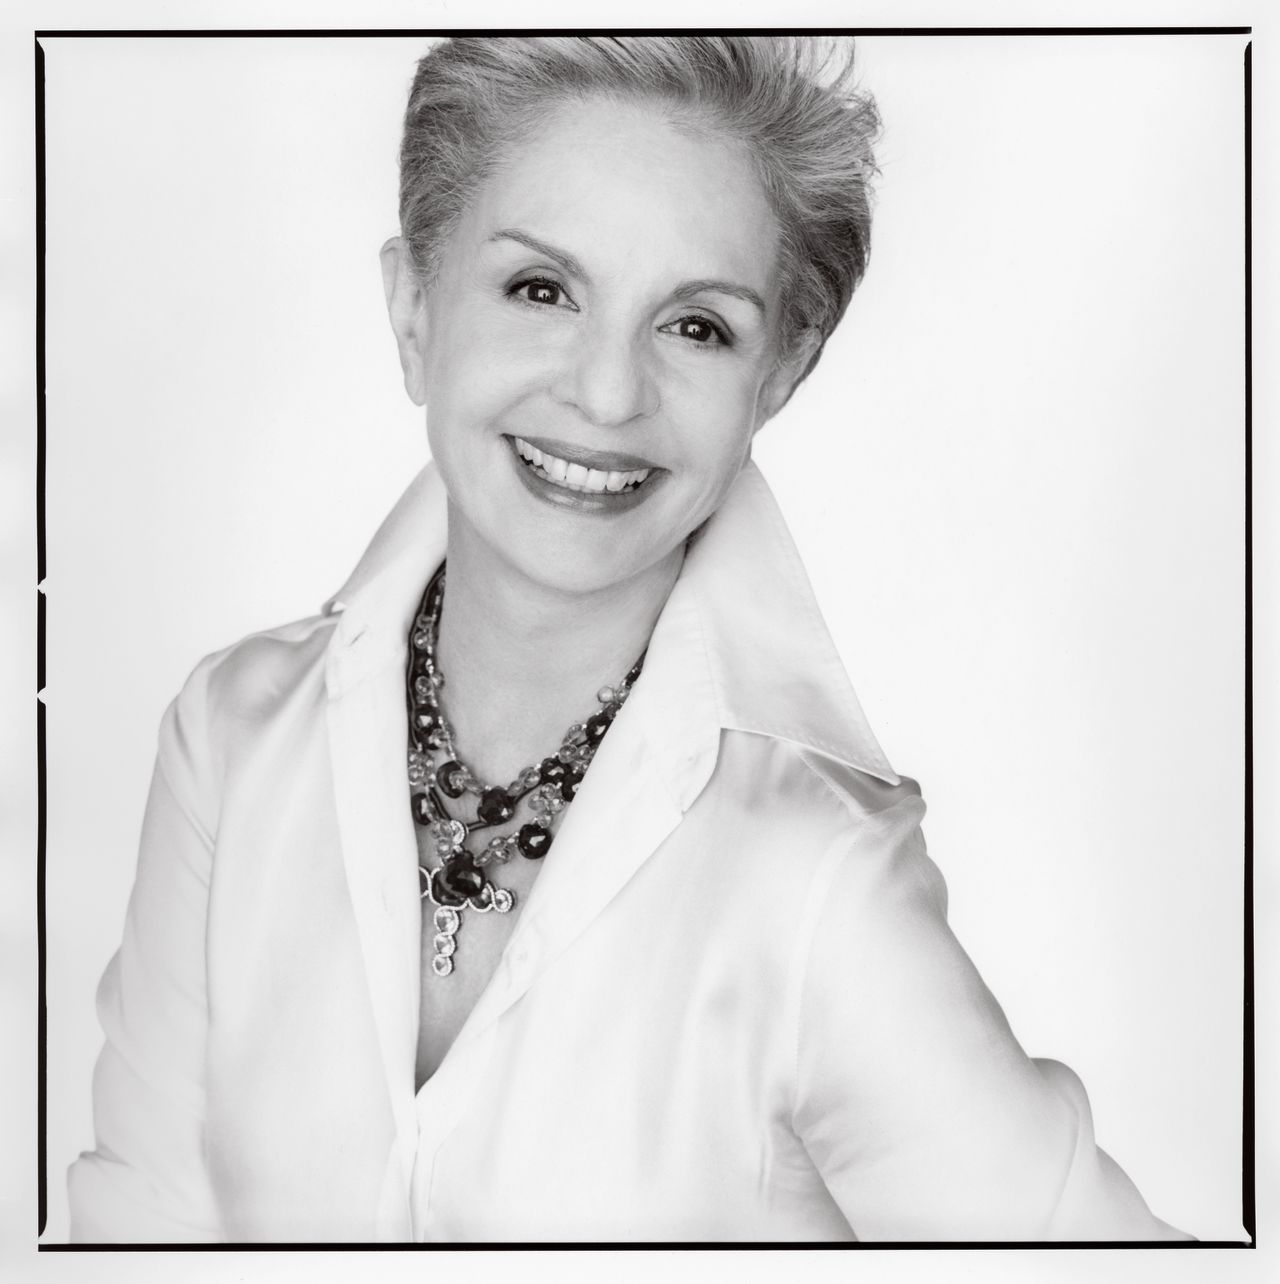 Fashion designer Carolina Herrera says the key to building a successful brand is separating the creative side from the business side. 